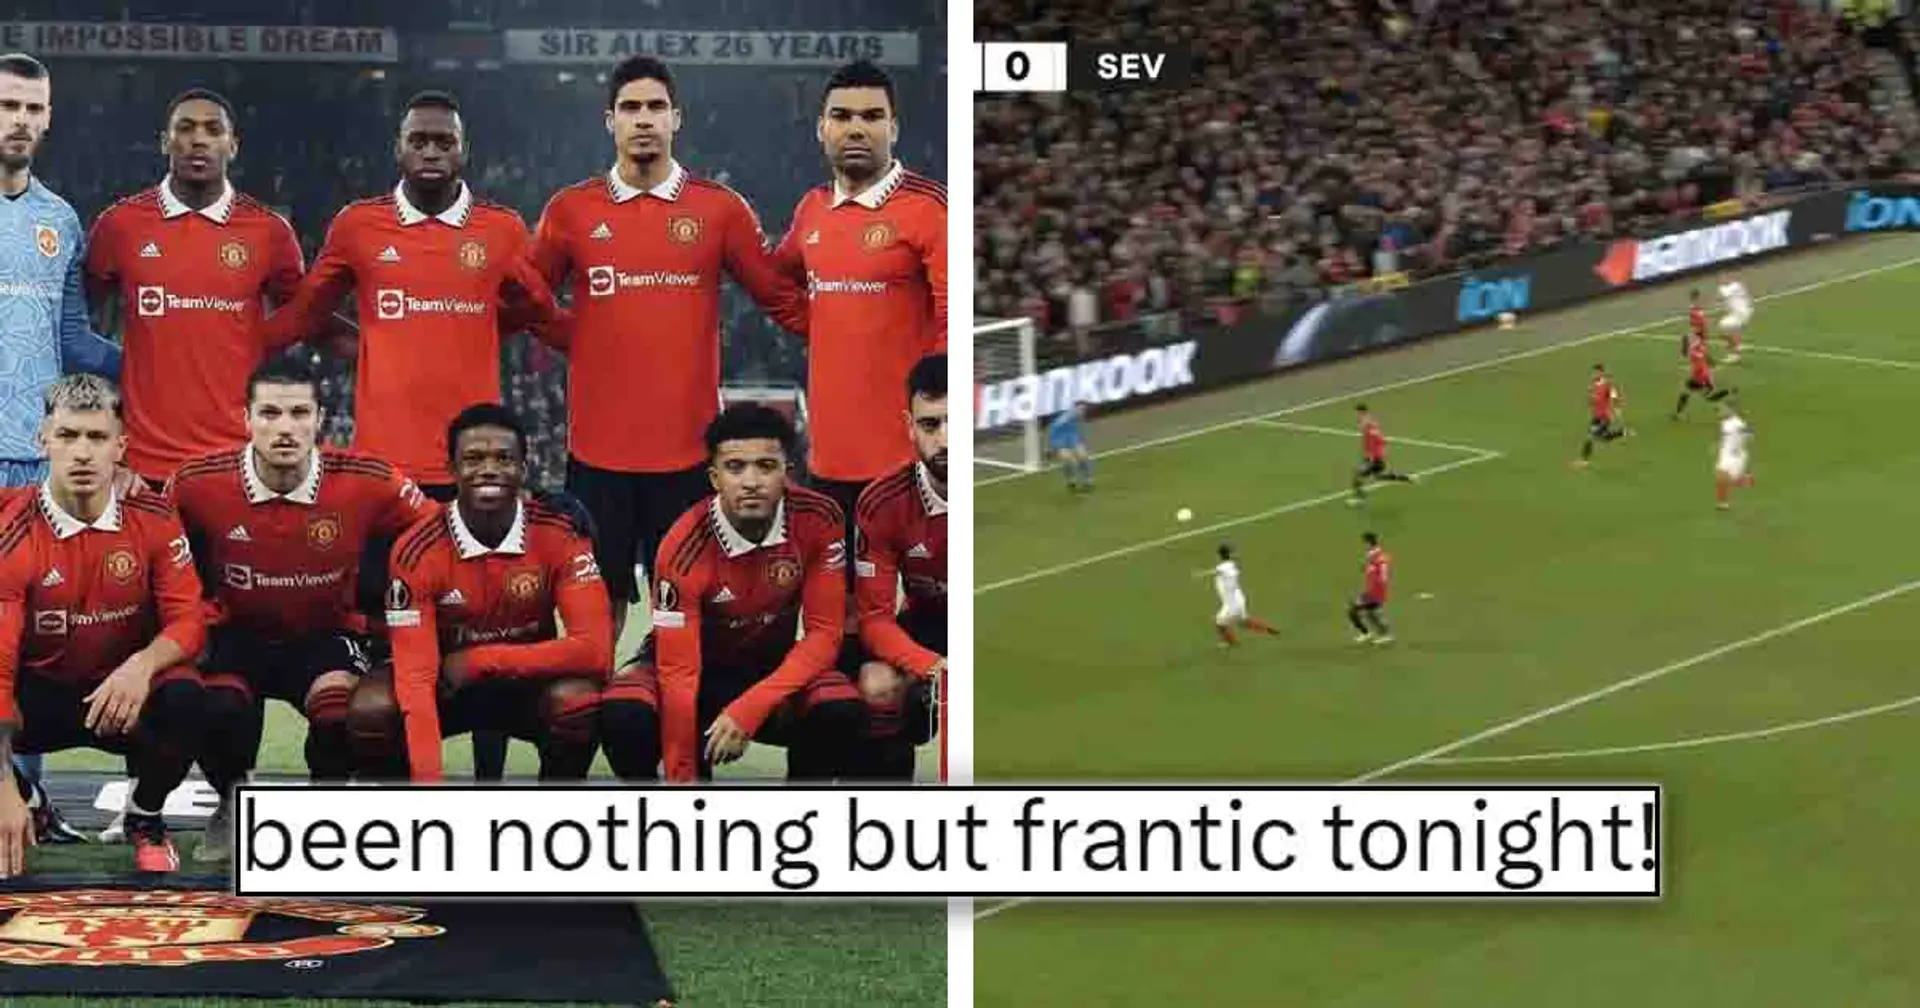 'All over the place': Man United fans name worst performer in Sevilla draw - not Maguire